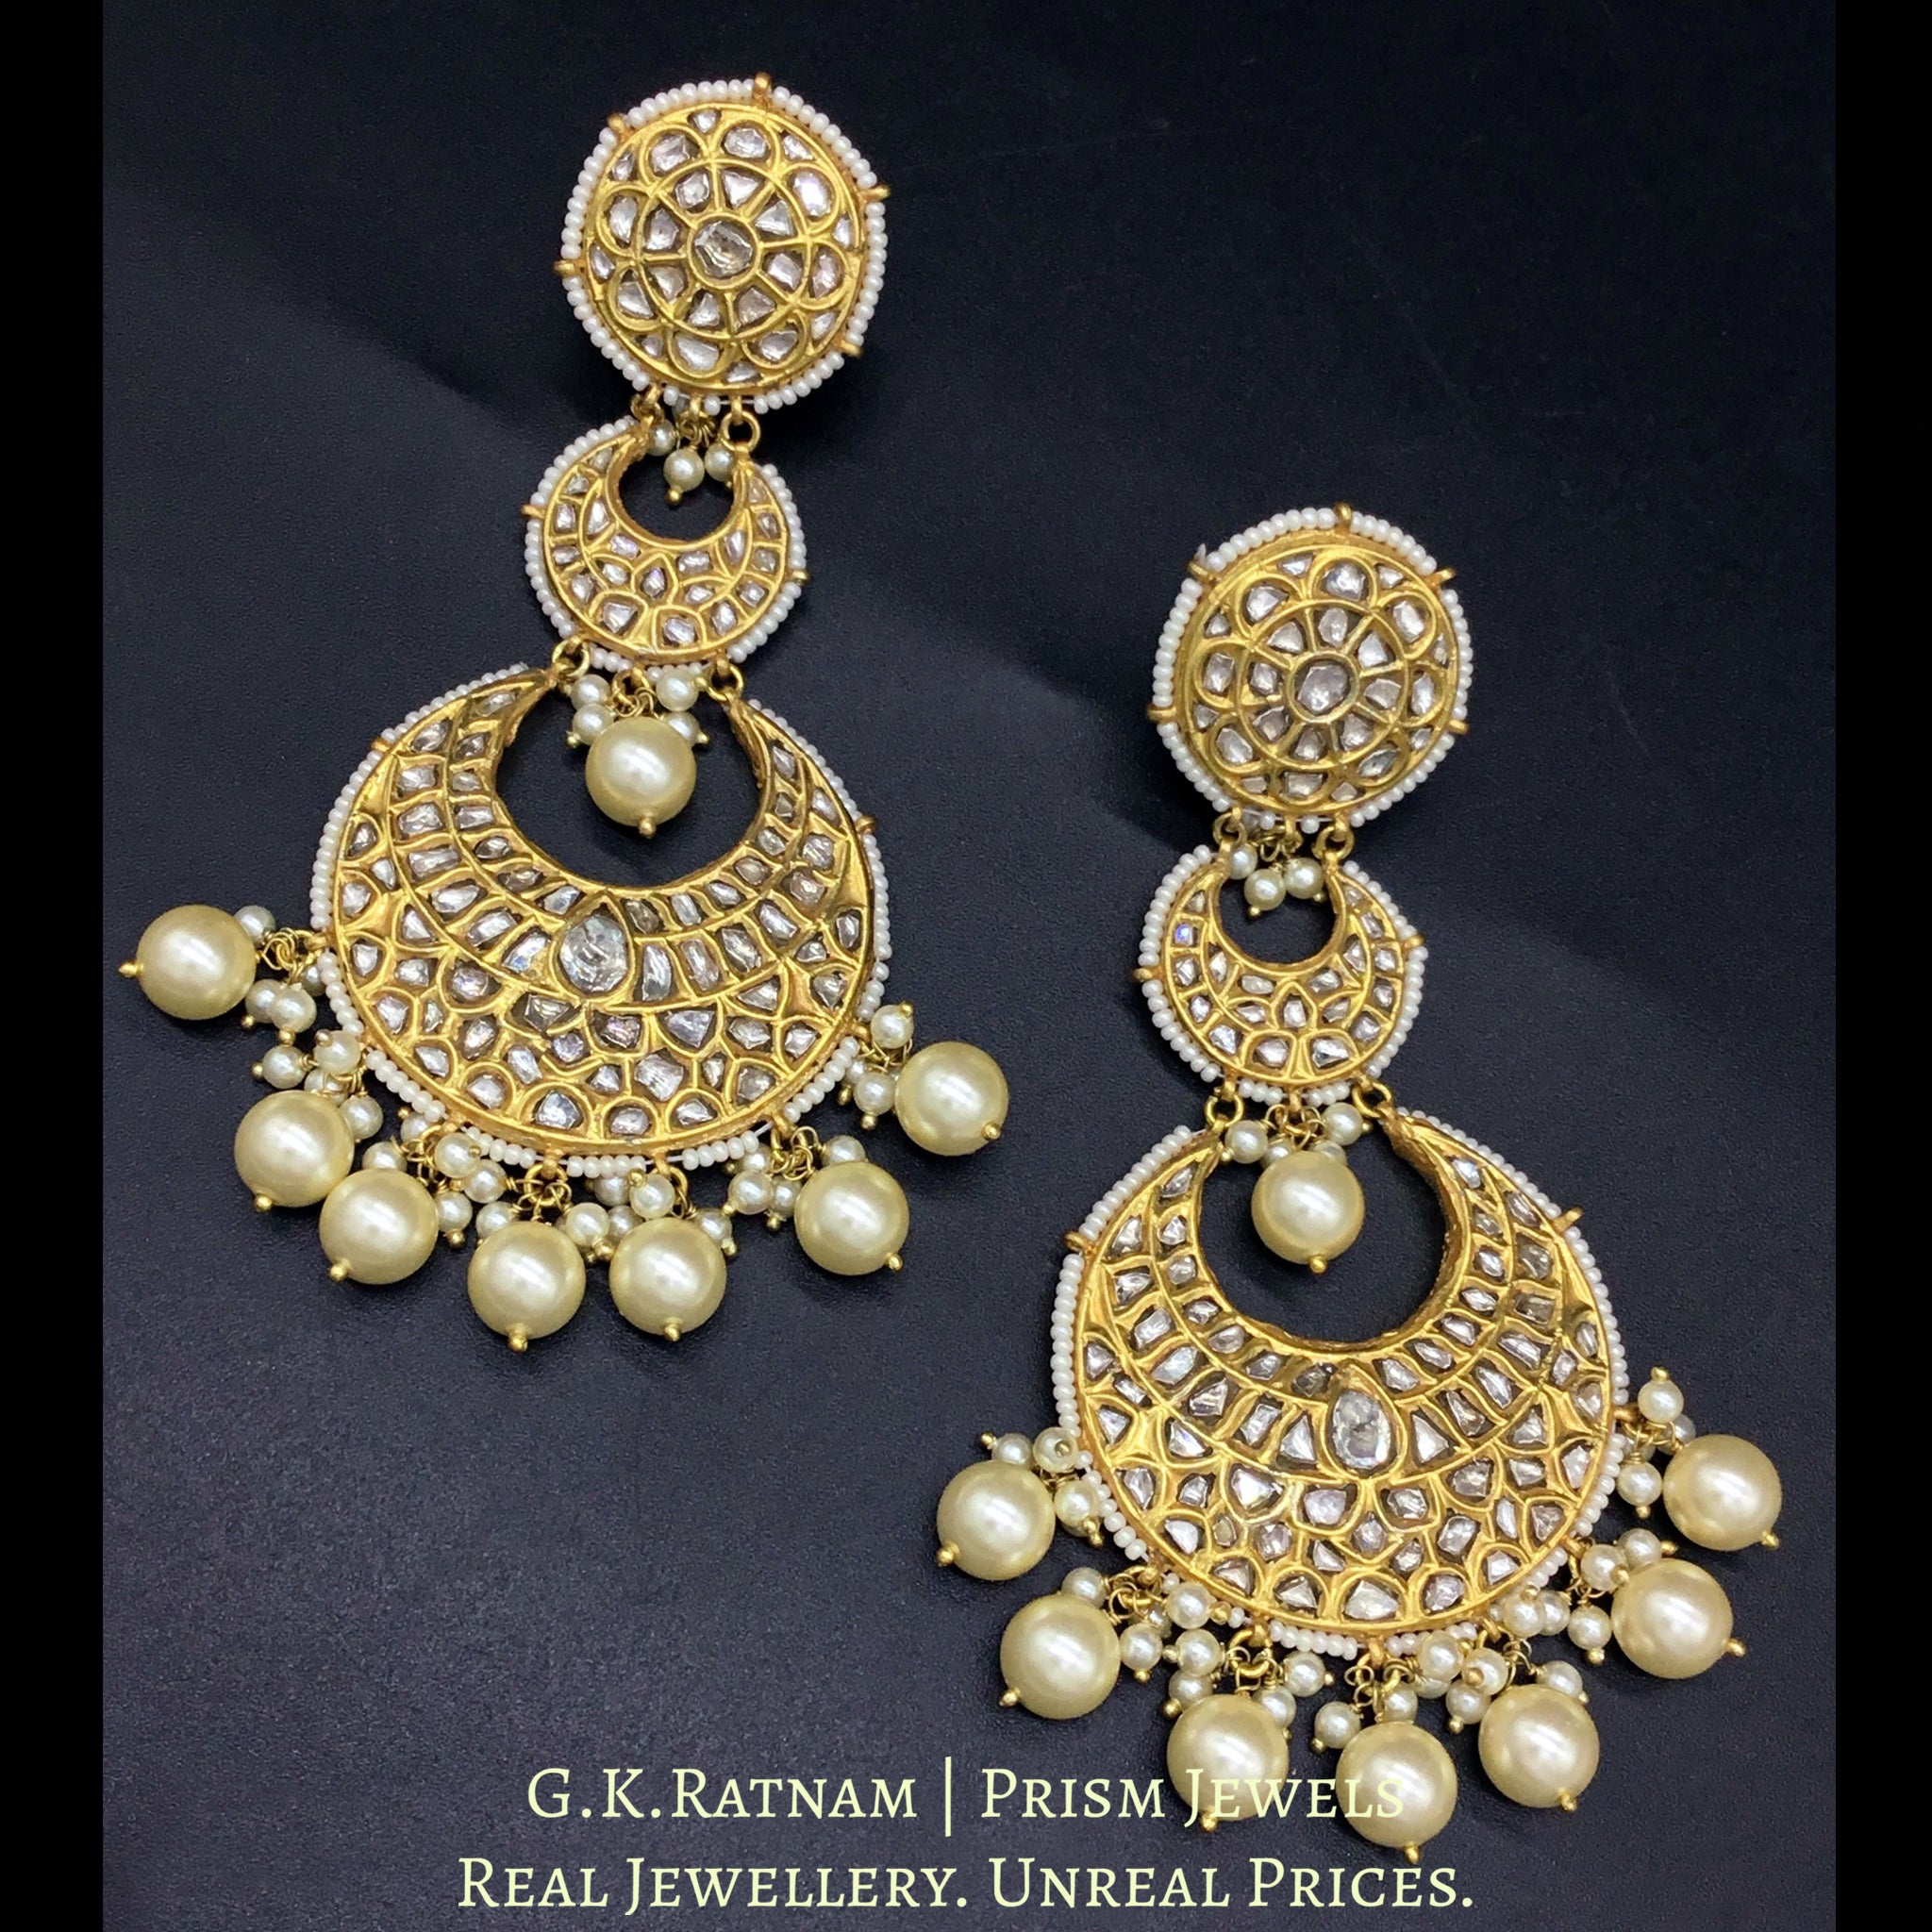 23k Gold and Diamond Polki Long Chand Bali Earring Pair enhanced by Pearls with a touch of green